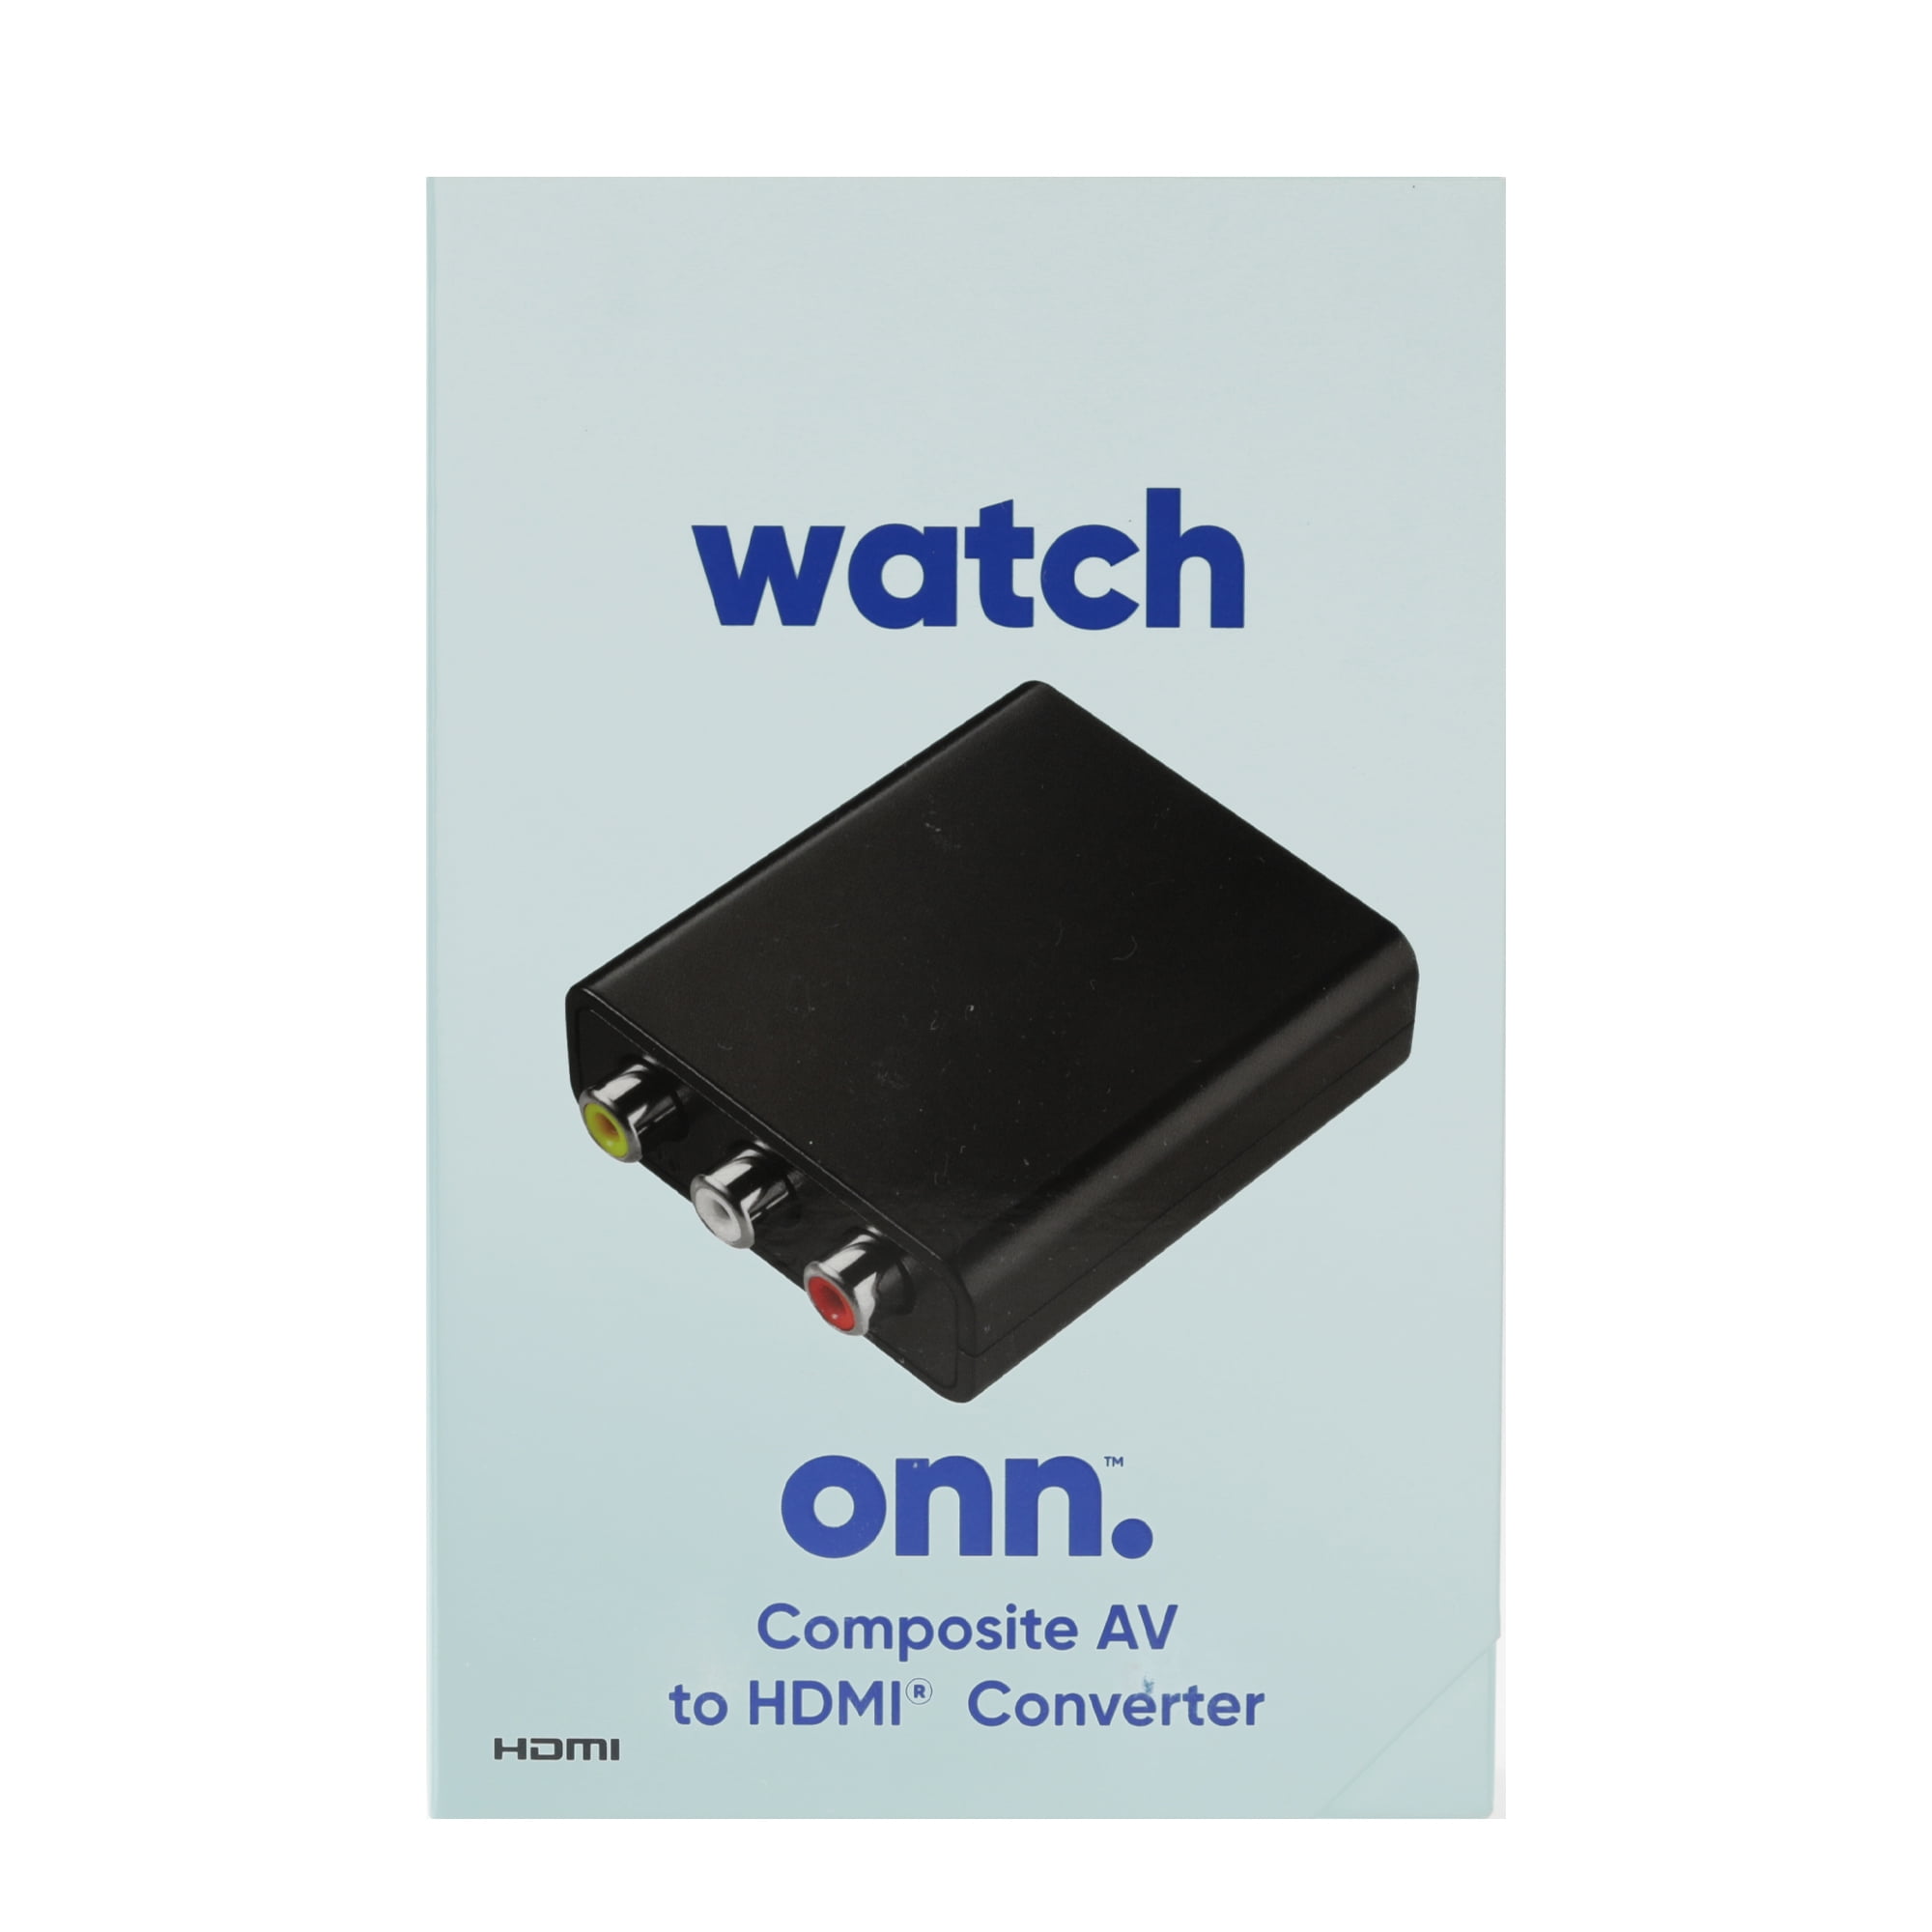 onn. Composite AV to HDMI Adapter, 1080P HD Quality, Game System, Black,  100008629, 6.5in and 0.3lb 